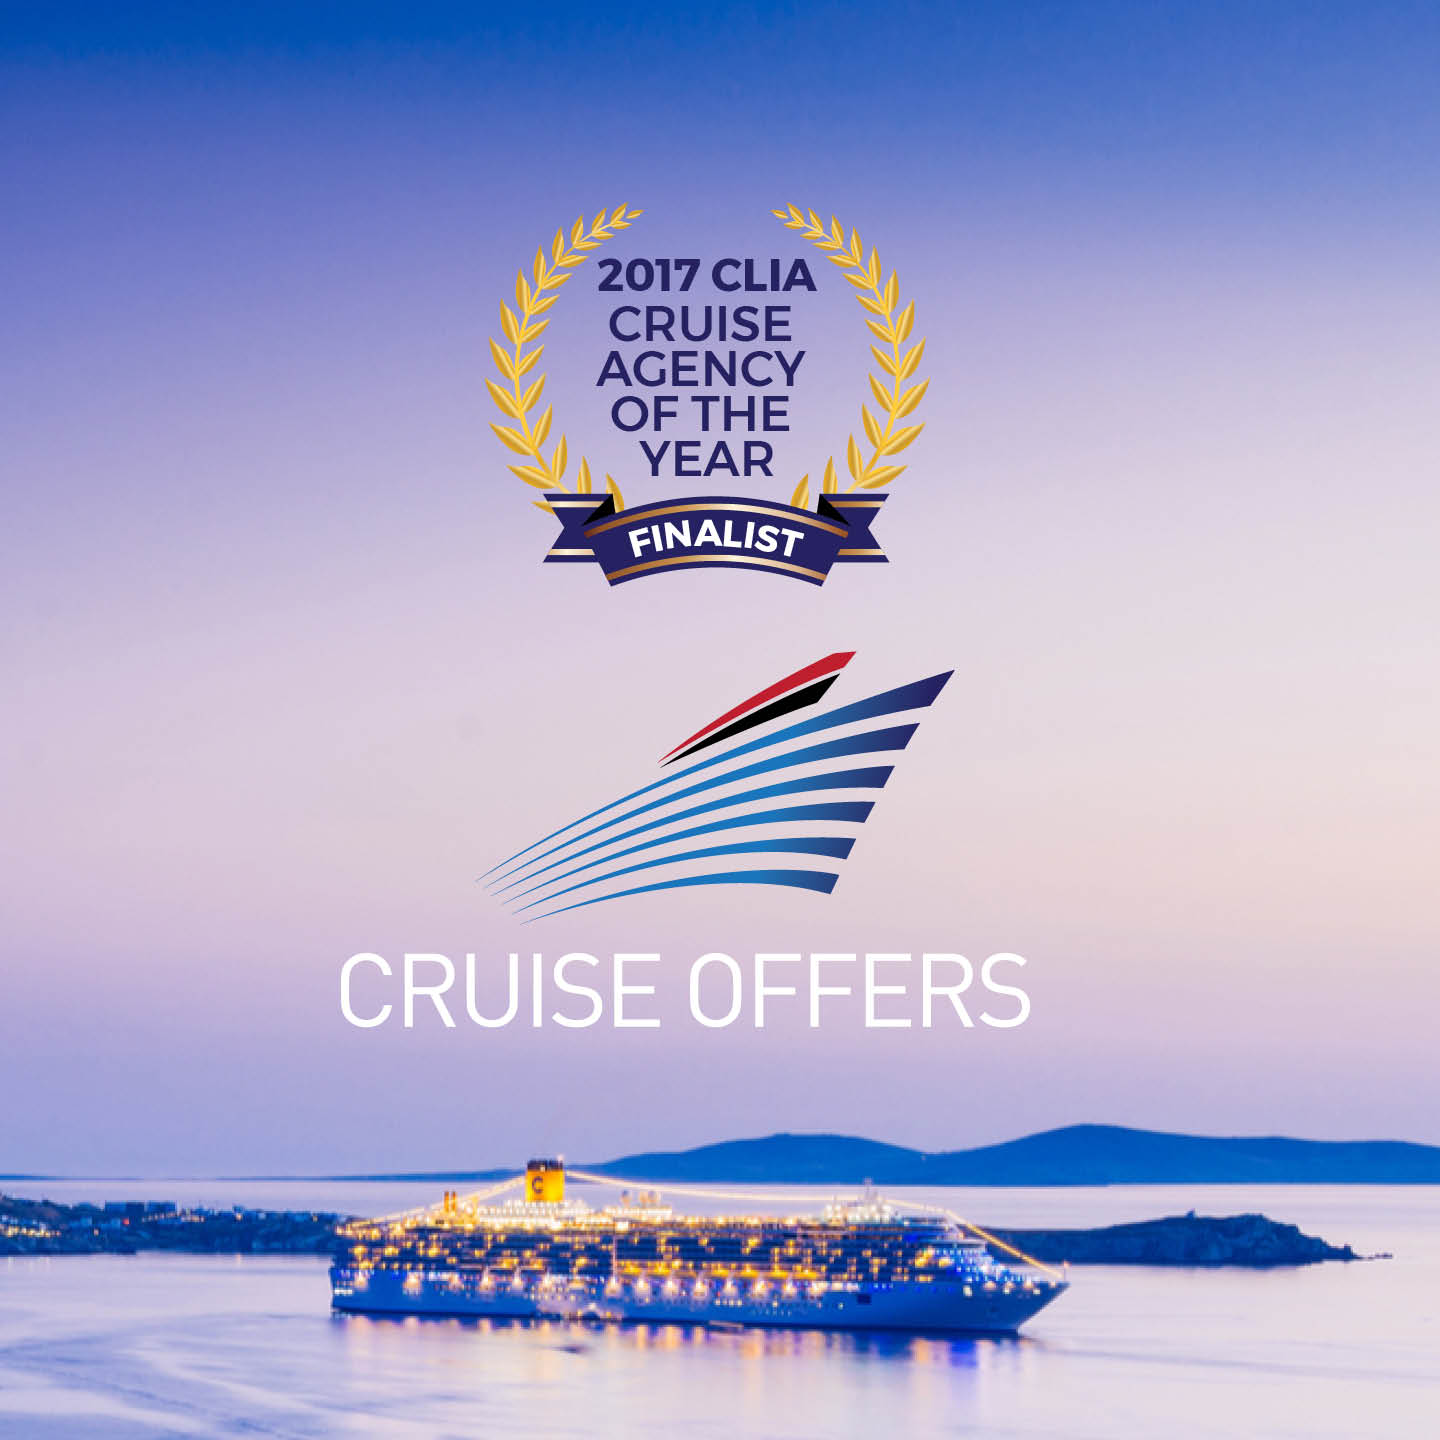 cruise-offers-about-us-thumb.jpg